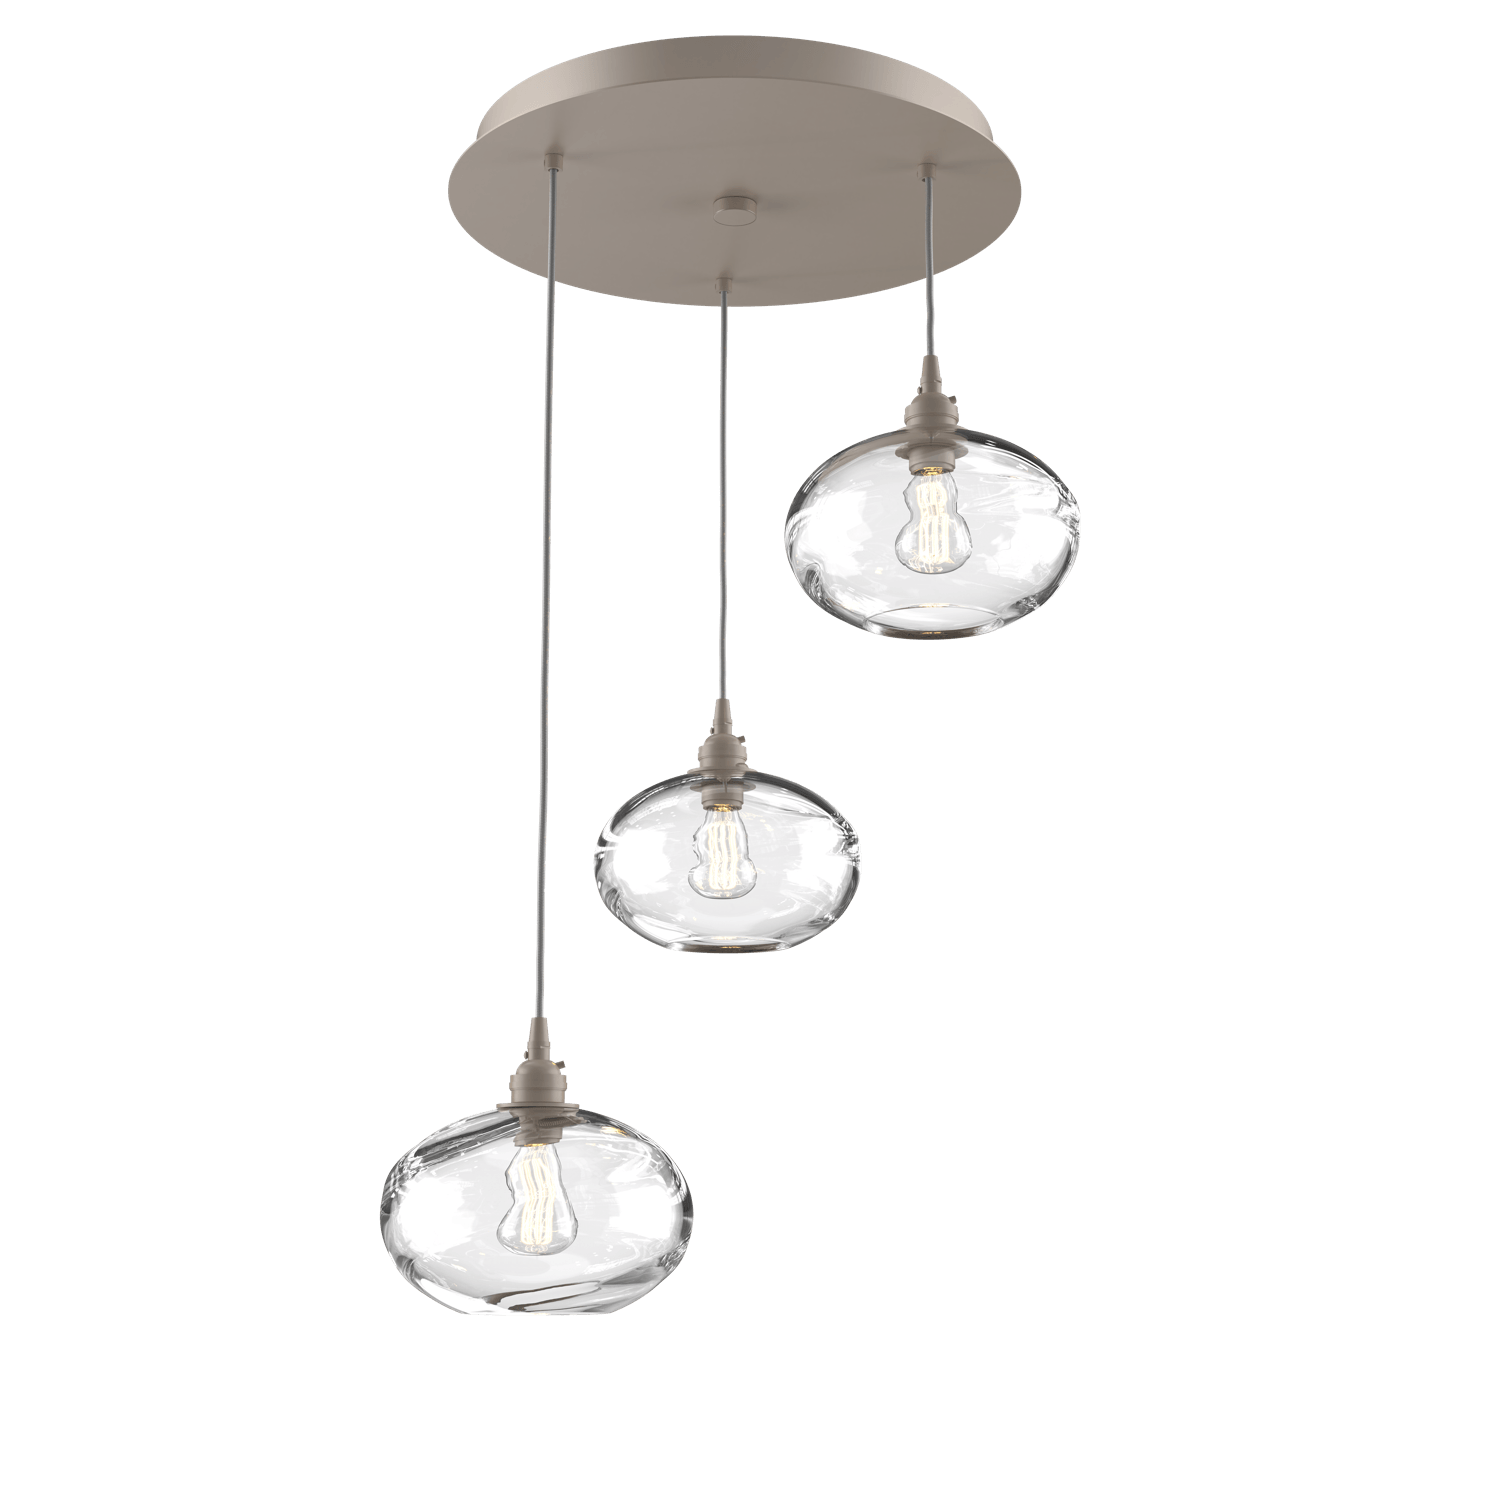 CHB0036-03-BS-OC-Hammerton-Studio-Optic-Blown-Glass-Coppa-3-light-round-pendant-chandelier-with-metallic-beige-silver-finish-and-optic-clear-blown-glass-shades-and-incandescent-lamping